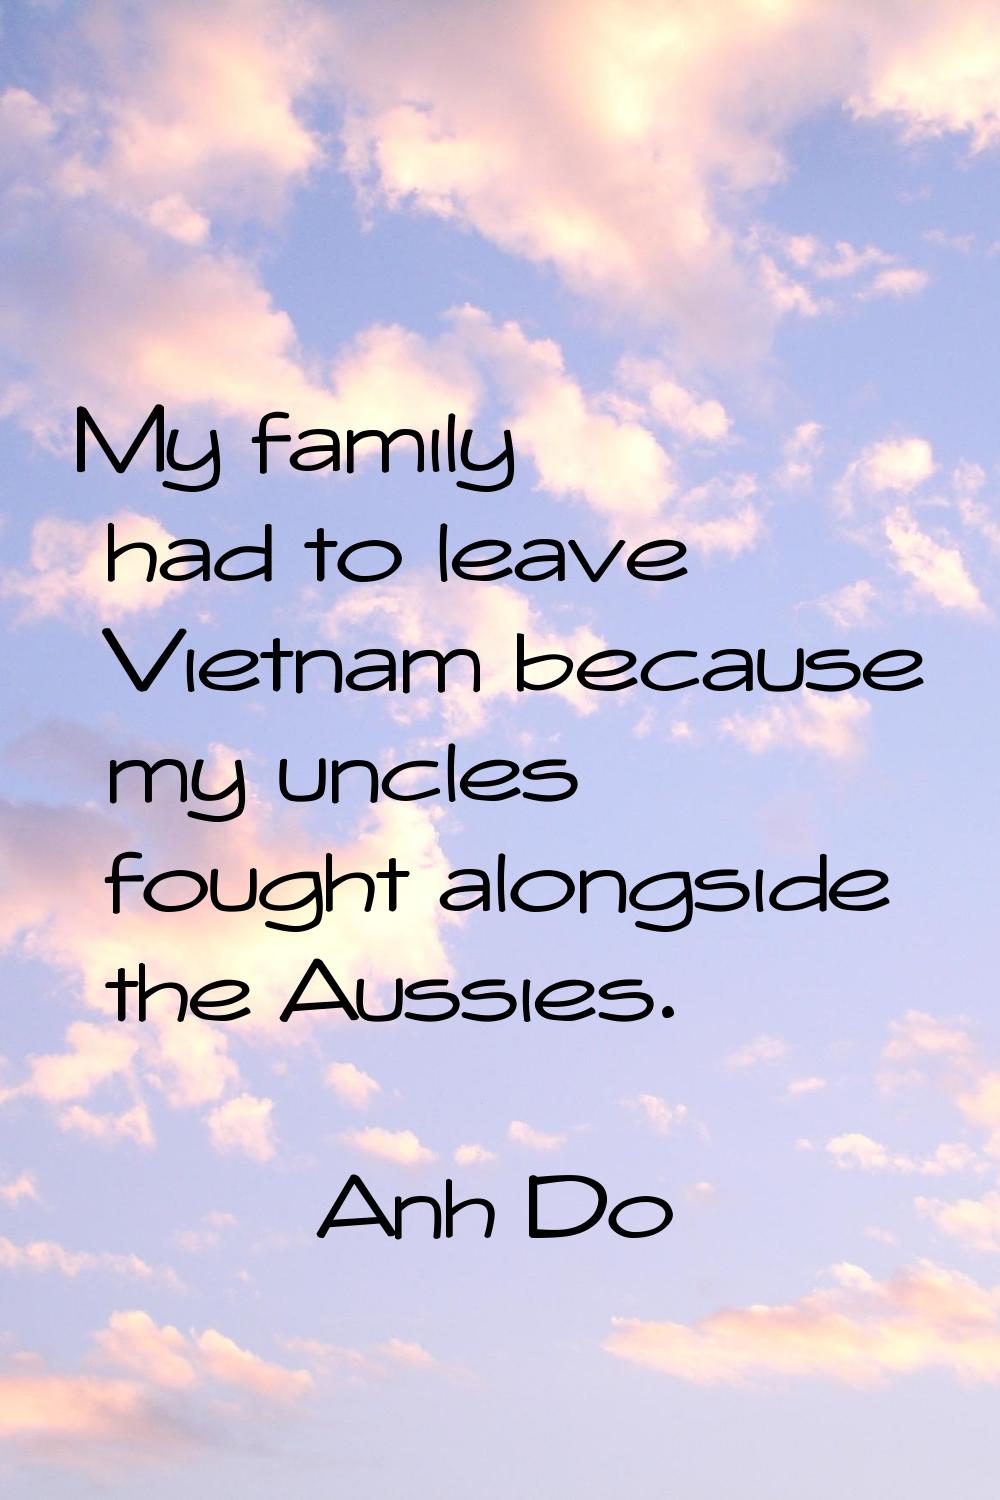 My family had to leave Vietnam because my uncles fought alongside the Aussies.